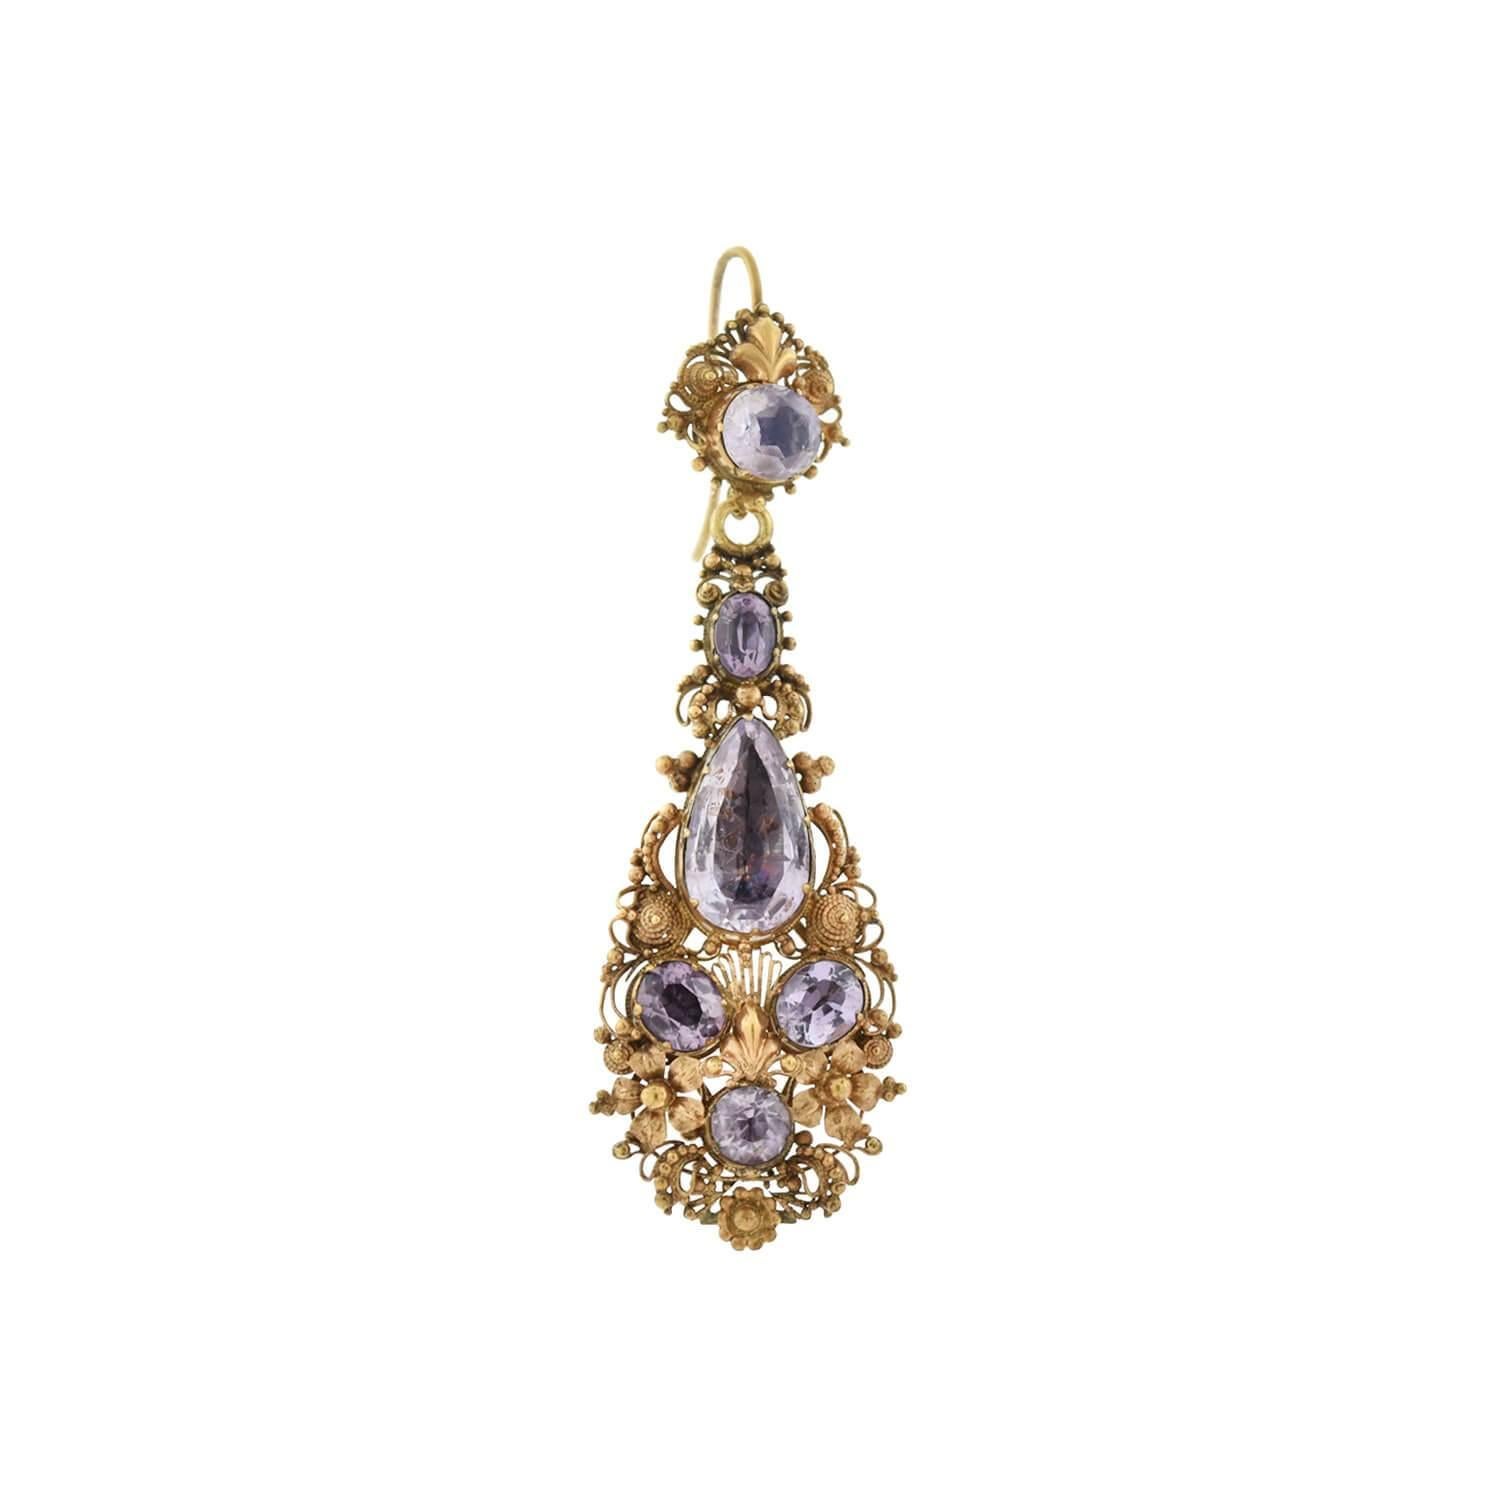 A gorgeous pair of earrings from the Georgian (ca1850s) era! Crafted in 18kt yellow gold, the earrings begin with an oval-shaped light purple amethyst stone, set in a closed-back East-to-West style. Feminine cannetille wirework and small gold beads